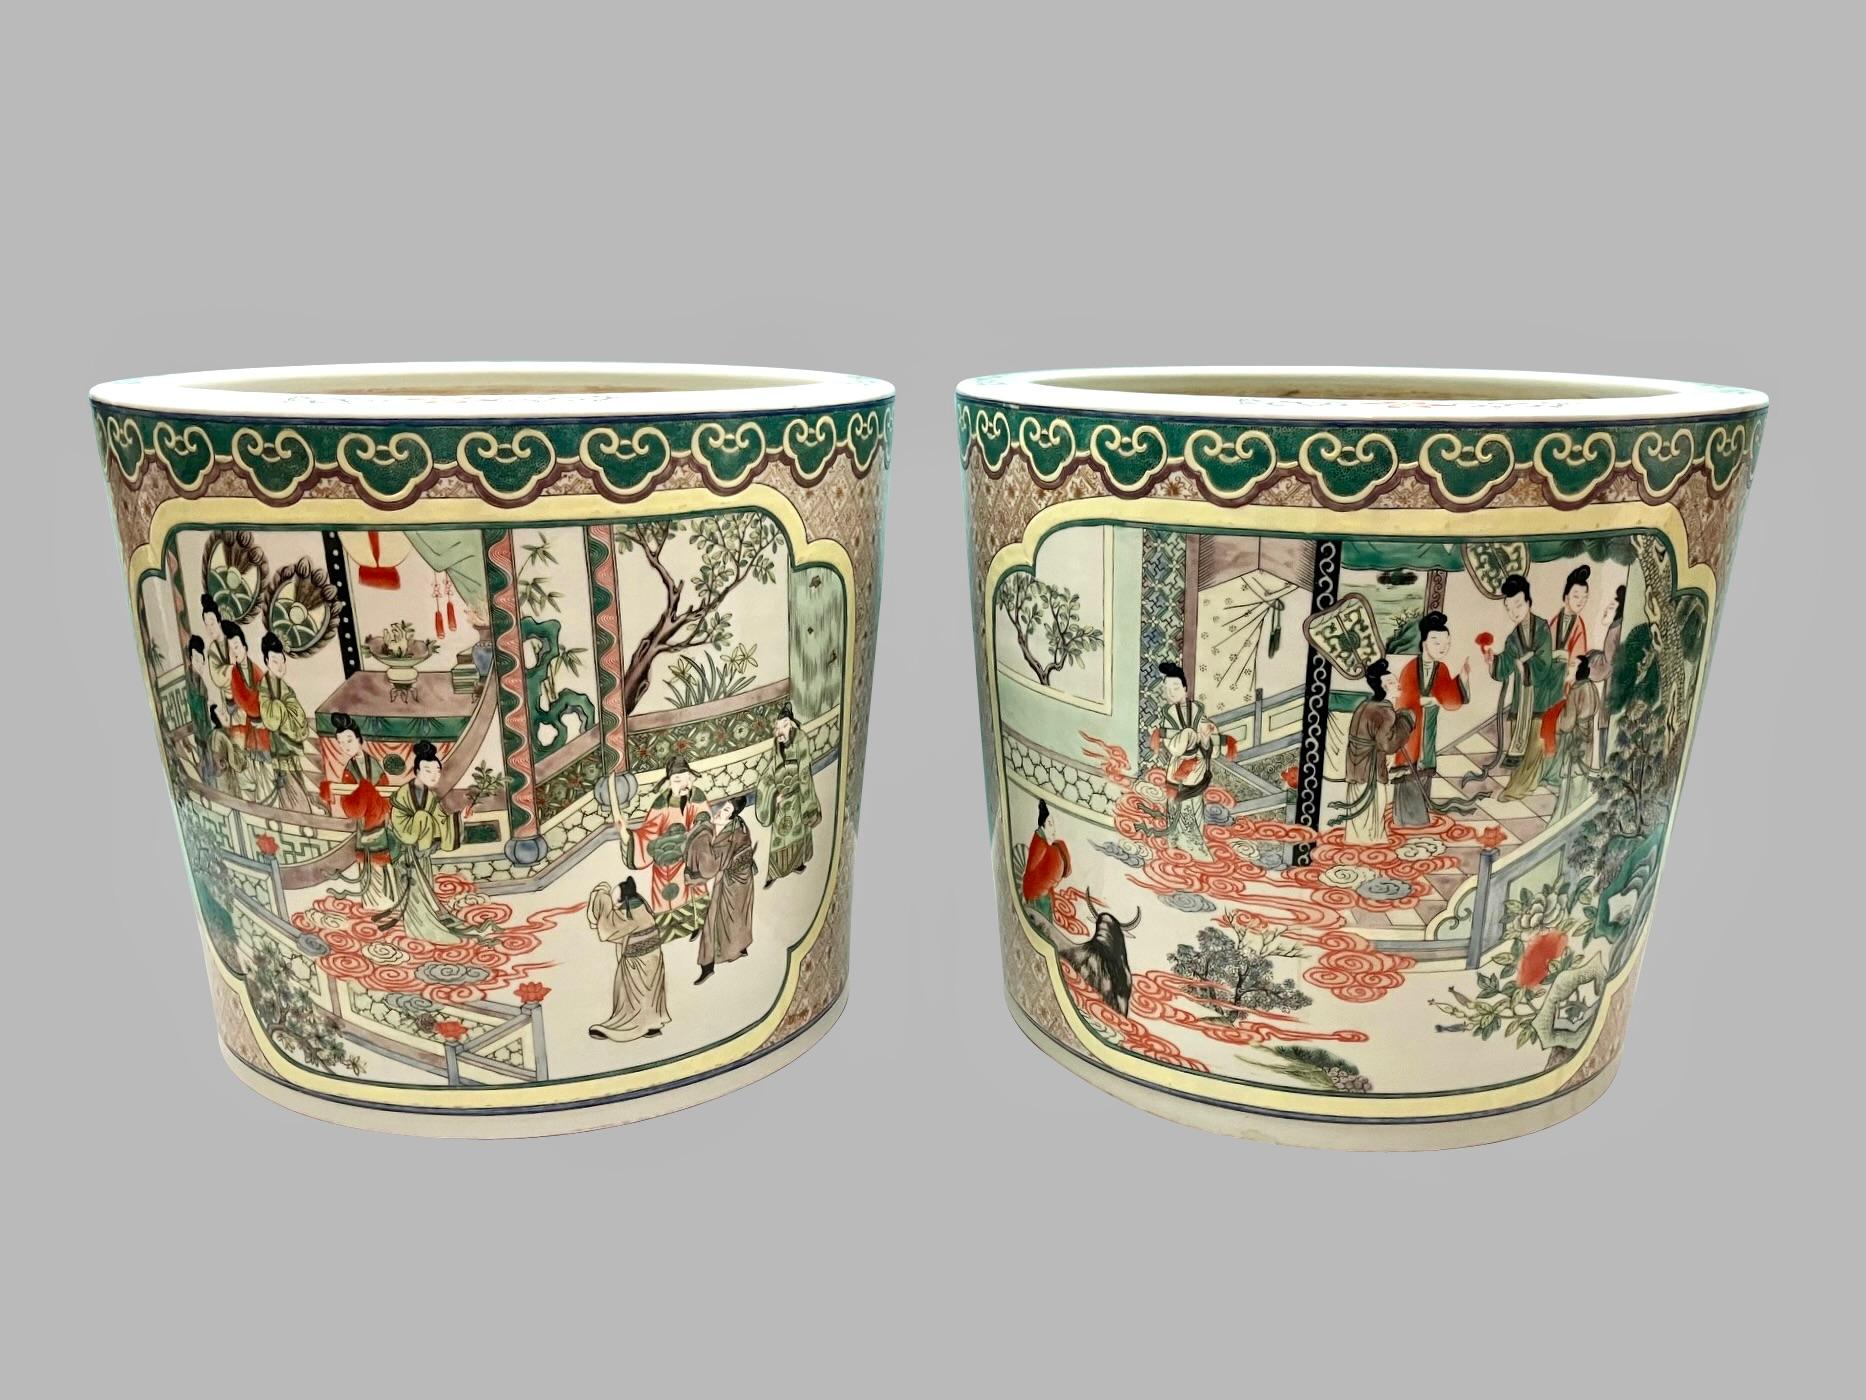 A pretty pair of Chinese export planters or fish bowls in the famille verte palette depicting robed men and women in a fantastic garden setting with animals, plants, flowers, fans and screens, all in the famille verte taste with additional colors of